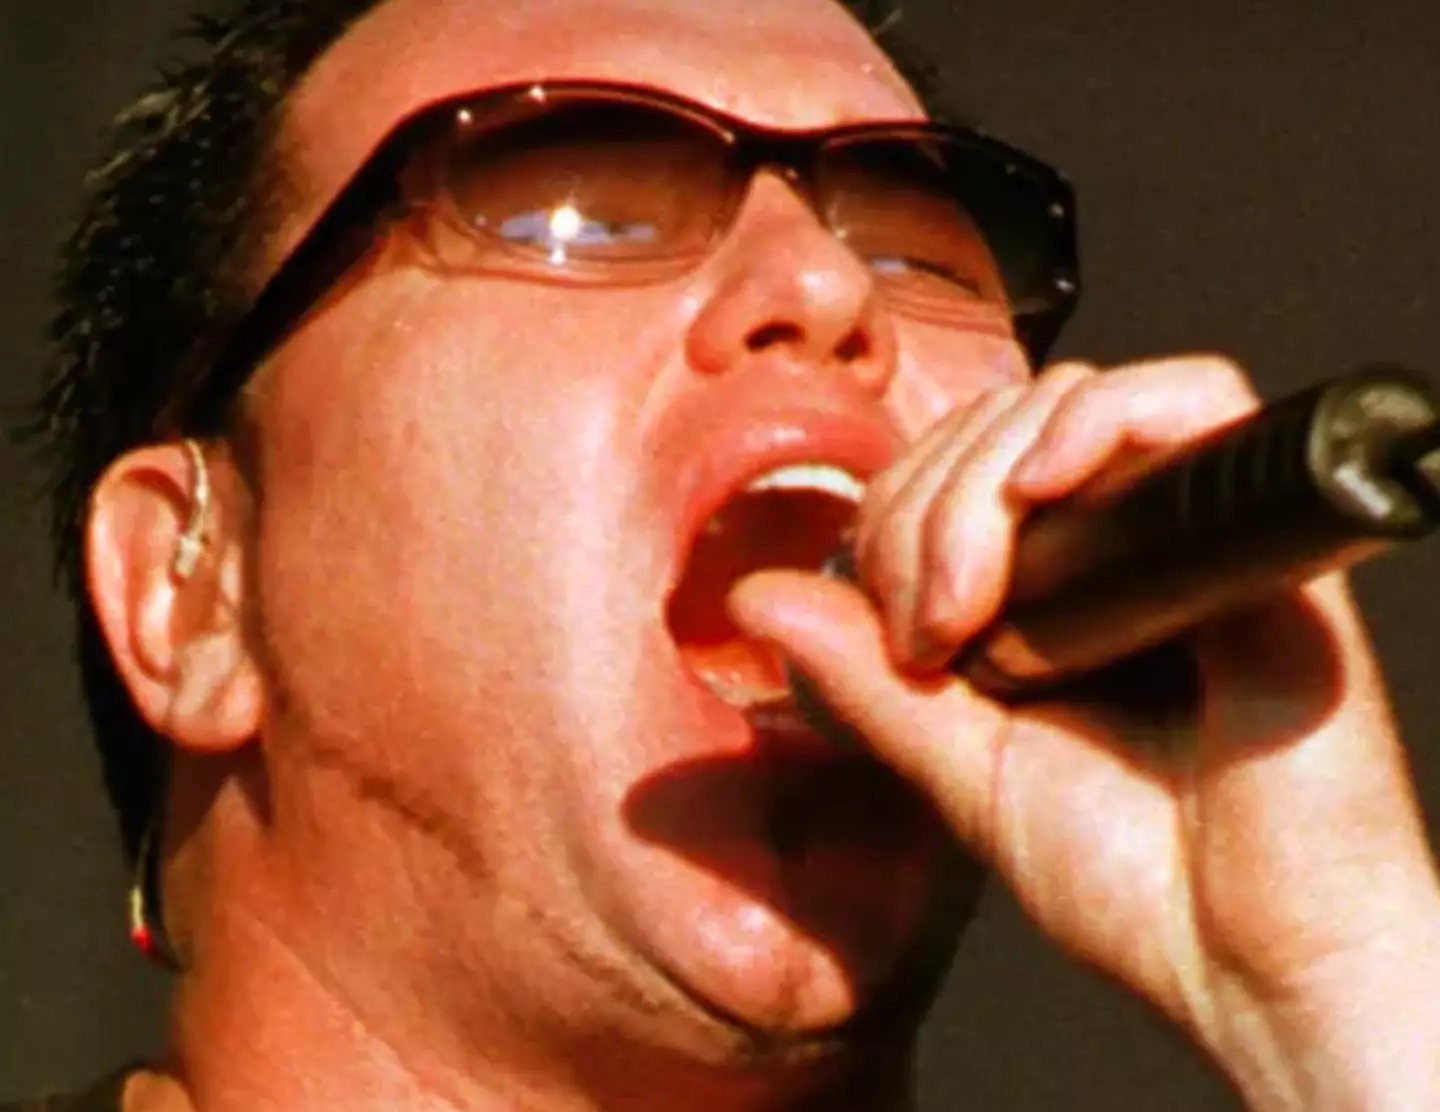 Smash Mouth are known for their track 'All Star'.